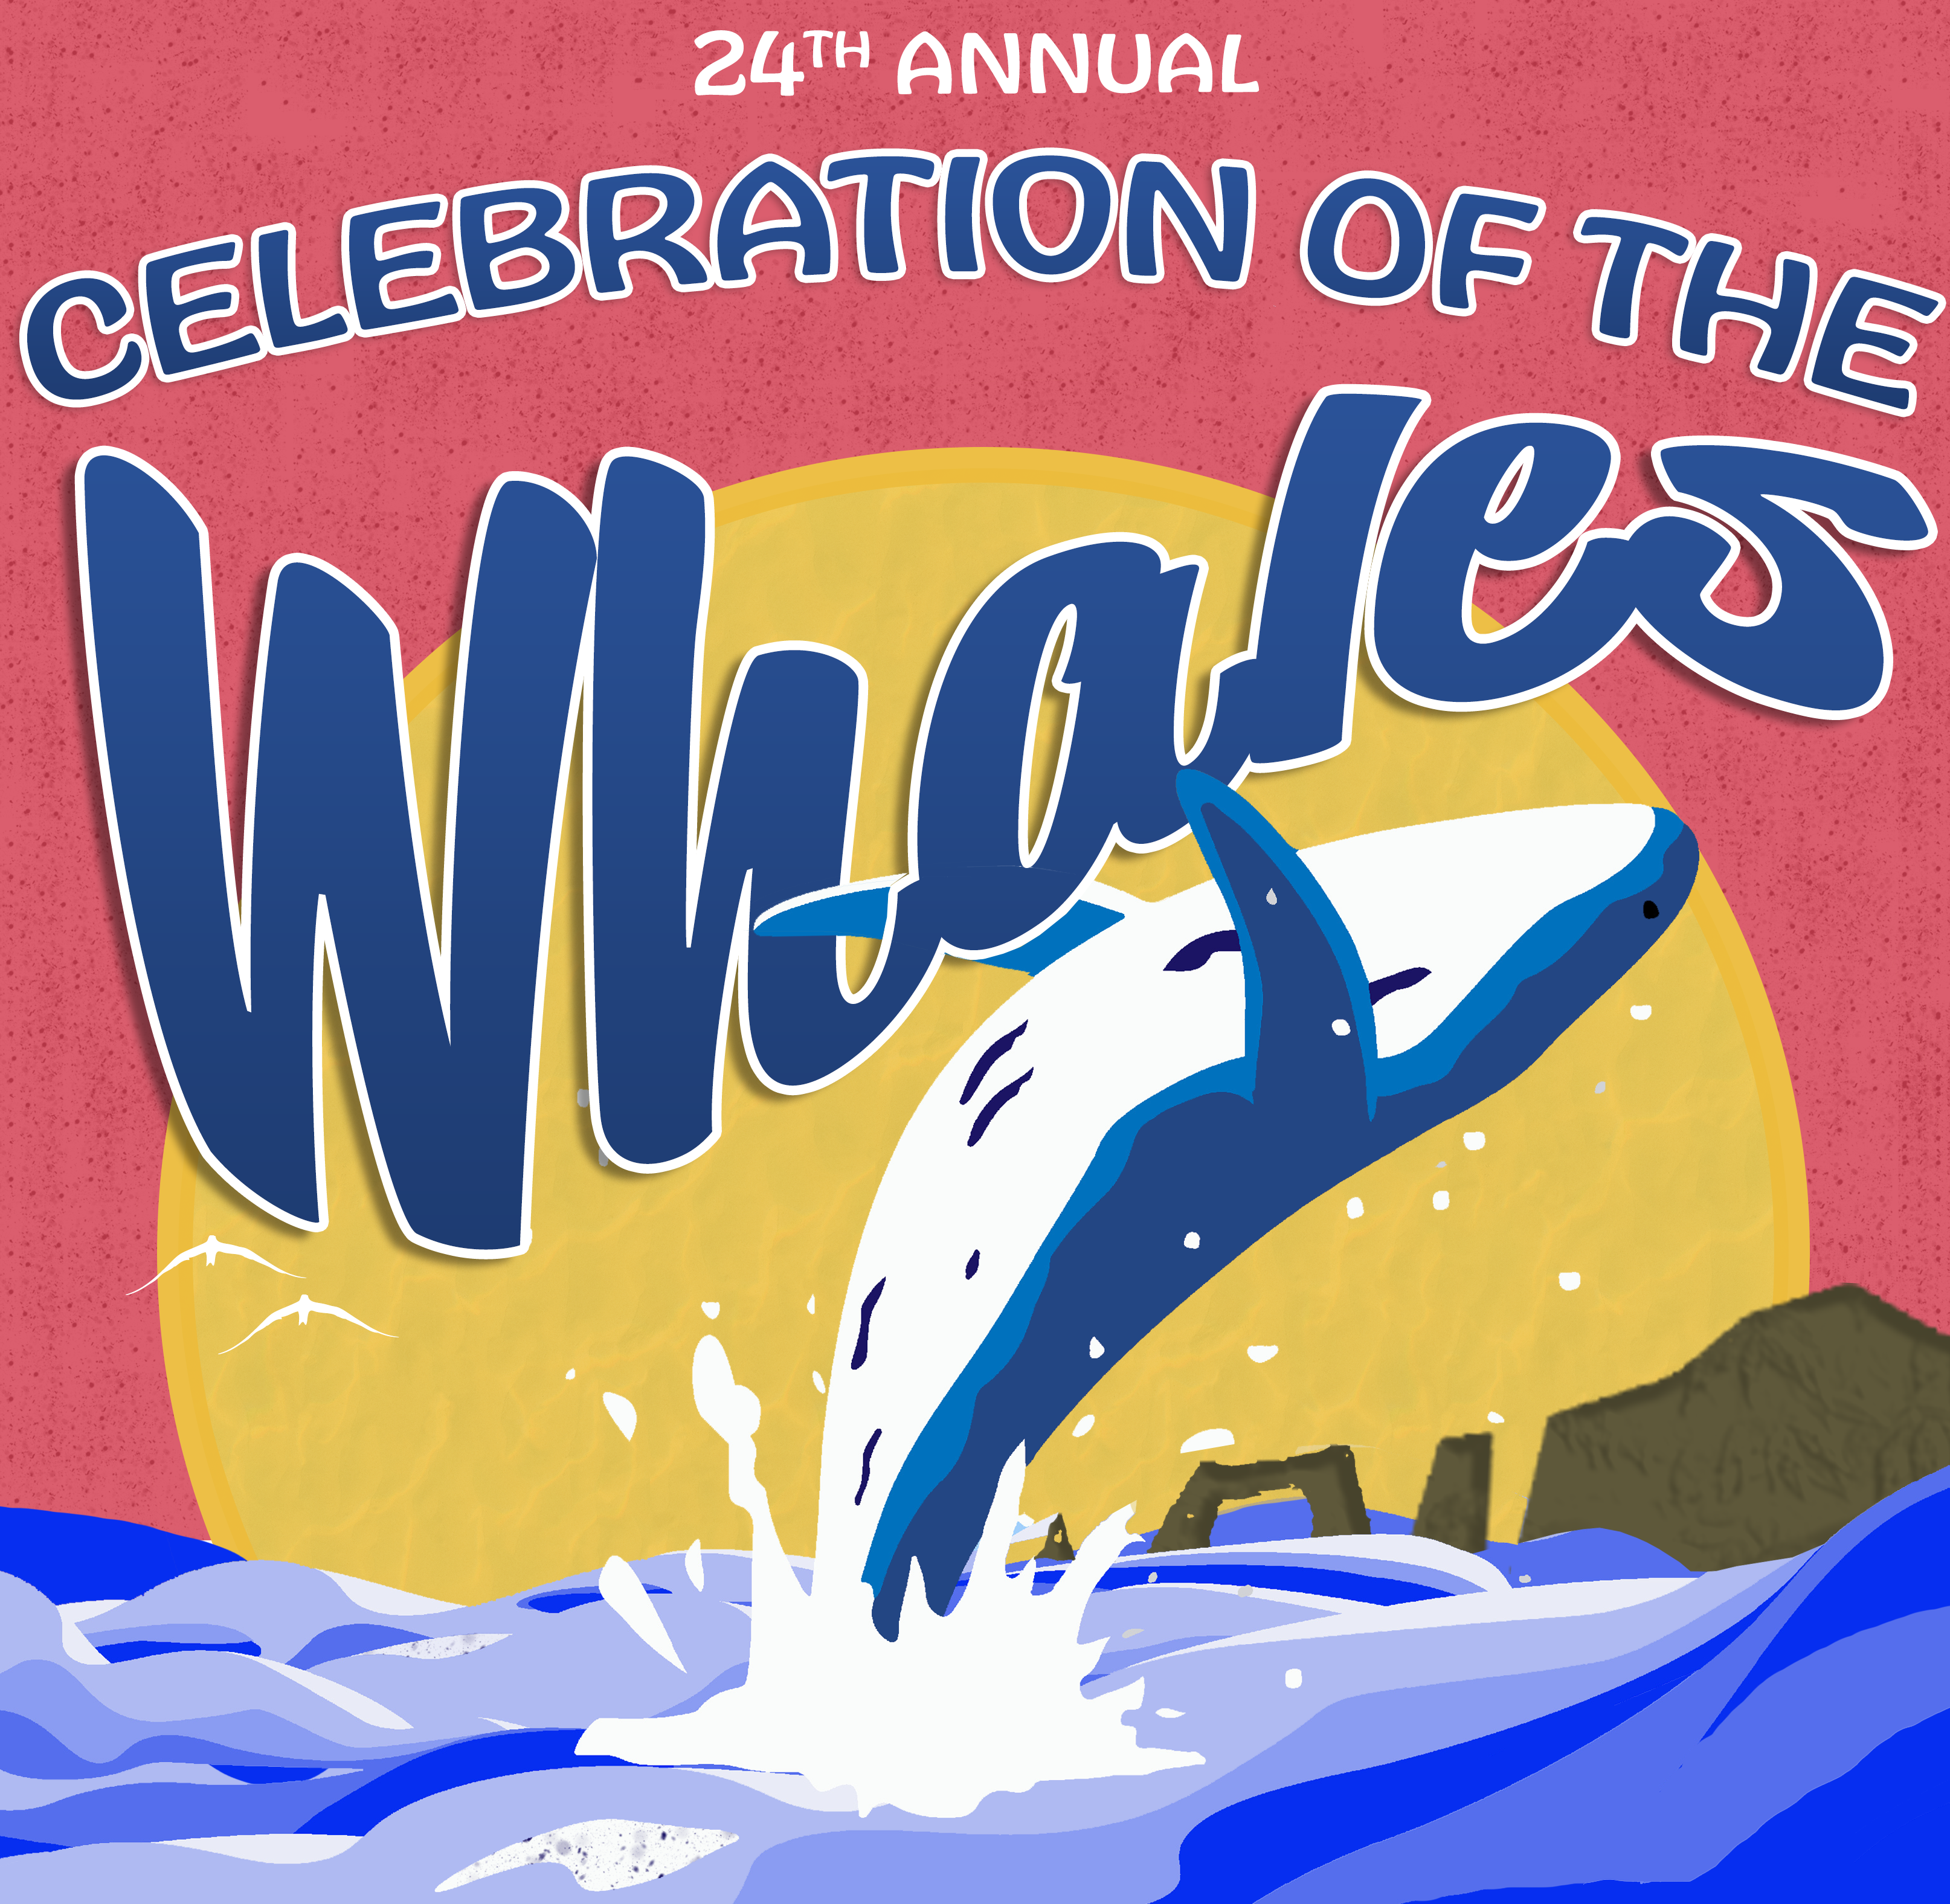 CELEBRATION OF THE WHALES 2023 LOGO 1